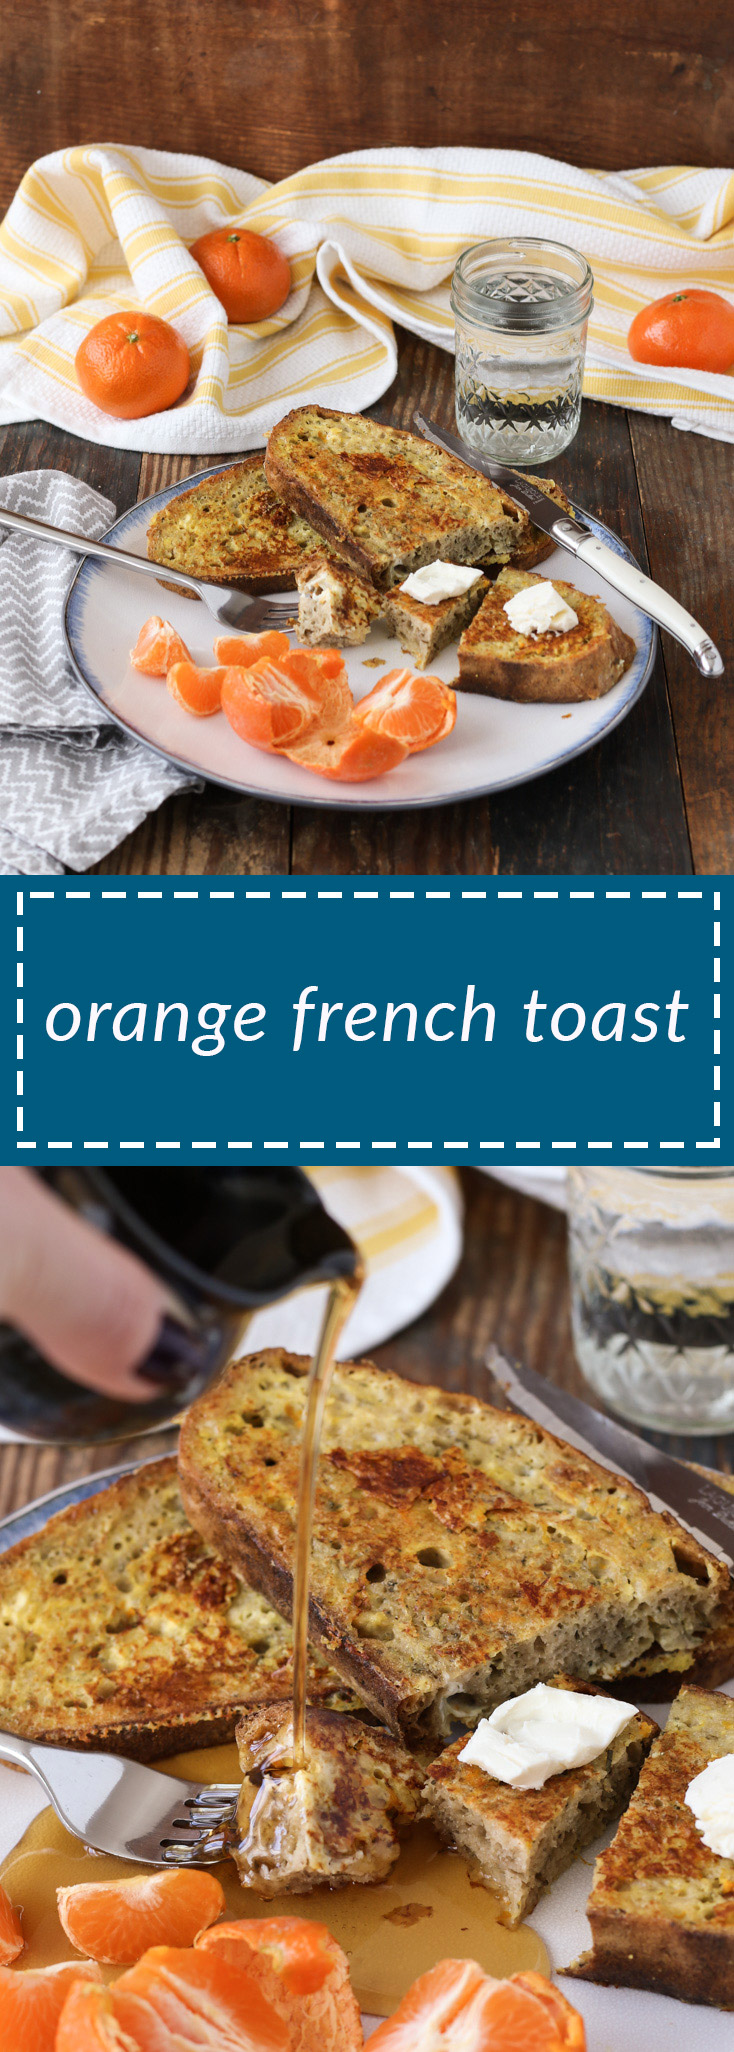 orange french toast tastes indulgent but is simple to make. the orange gives a subtle flavor boost, making good french toast even better.